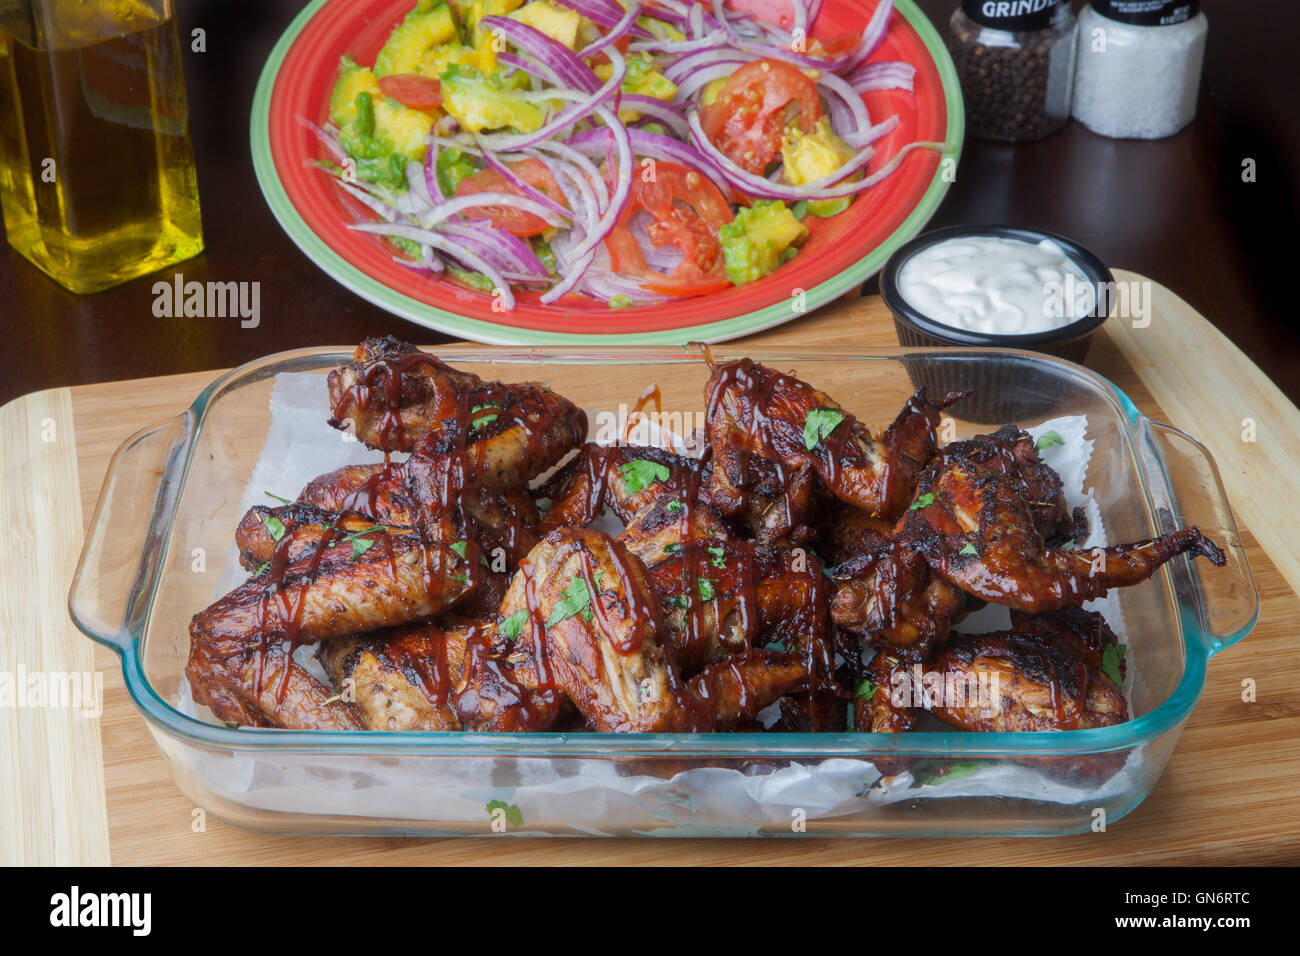 Chicken Wings Avocado red onion tomato salad blue cheese olive oil slat and pepper grinder Stock Photo